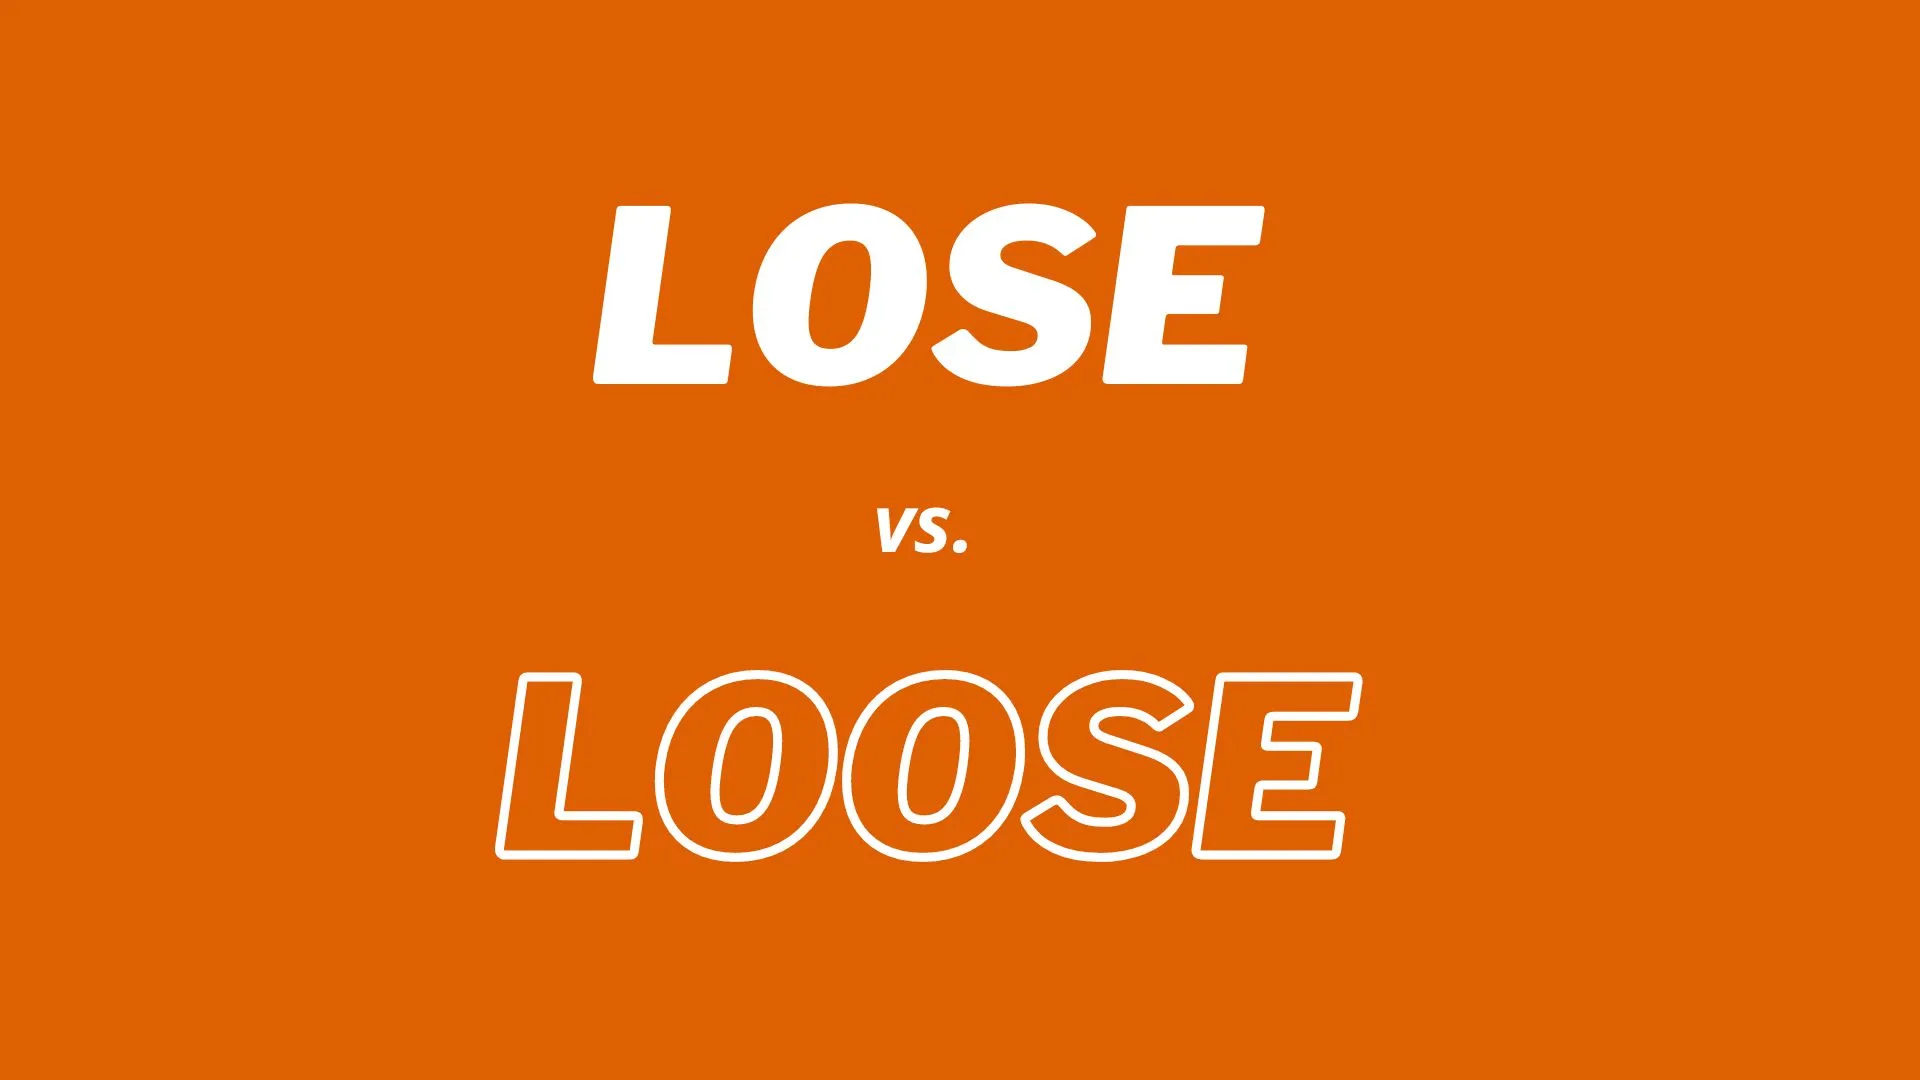 Explenation of the difference between "lose" and "loose" in two sentences.